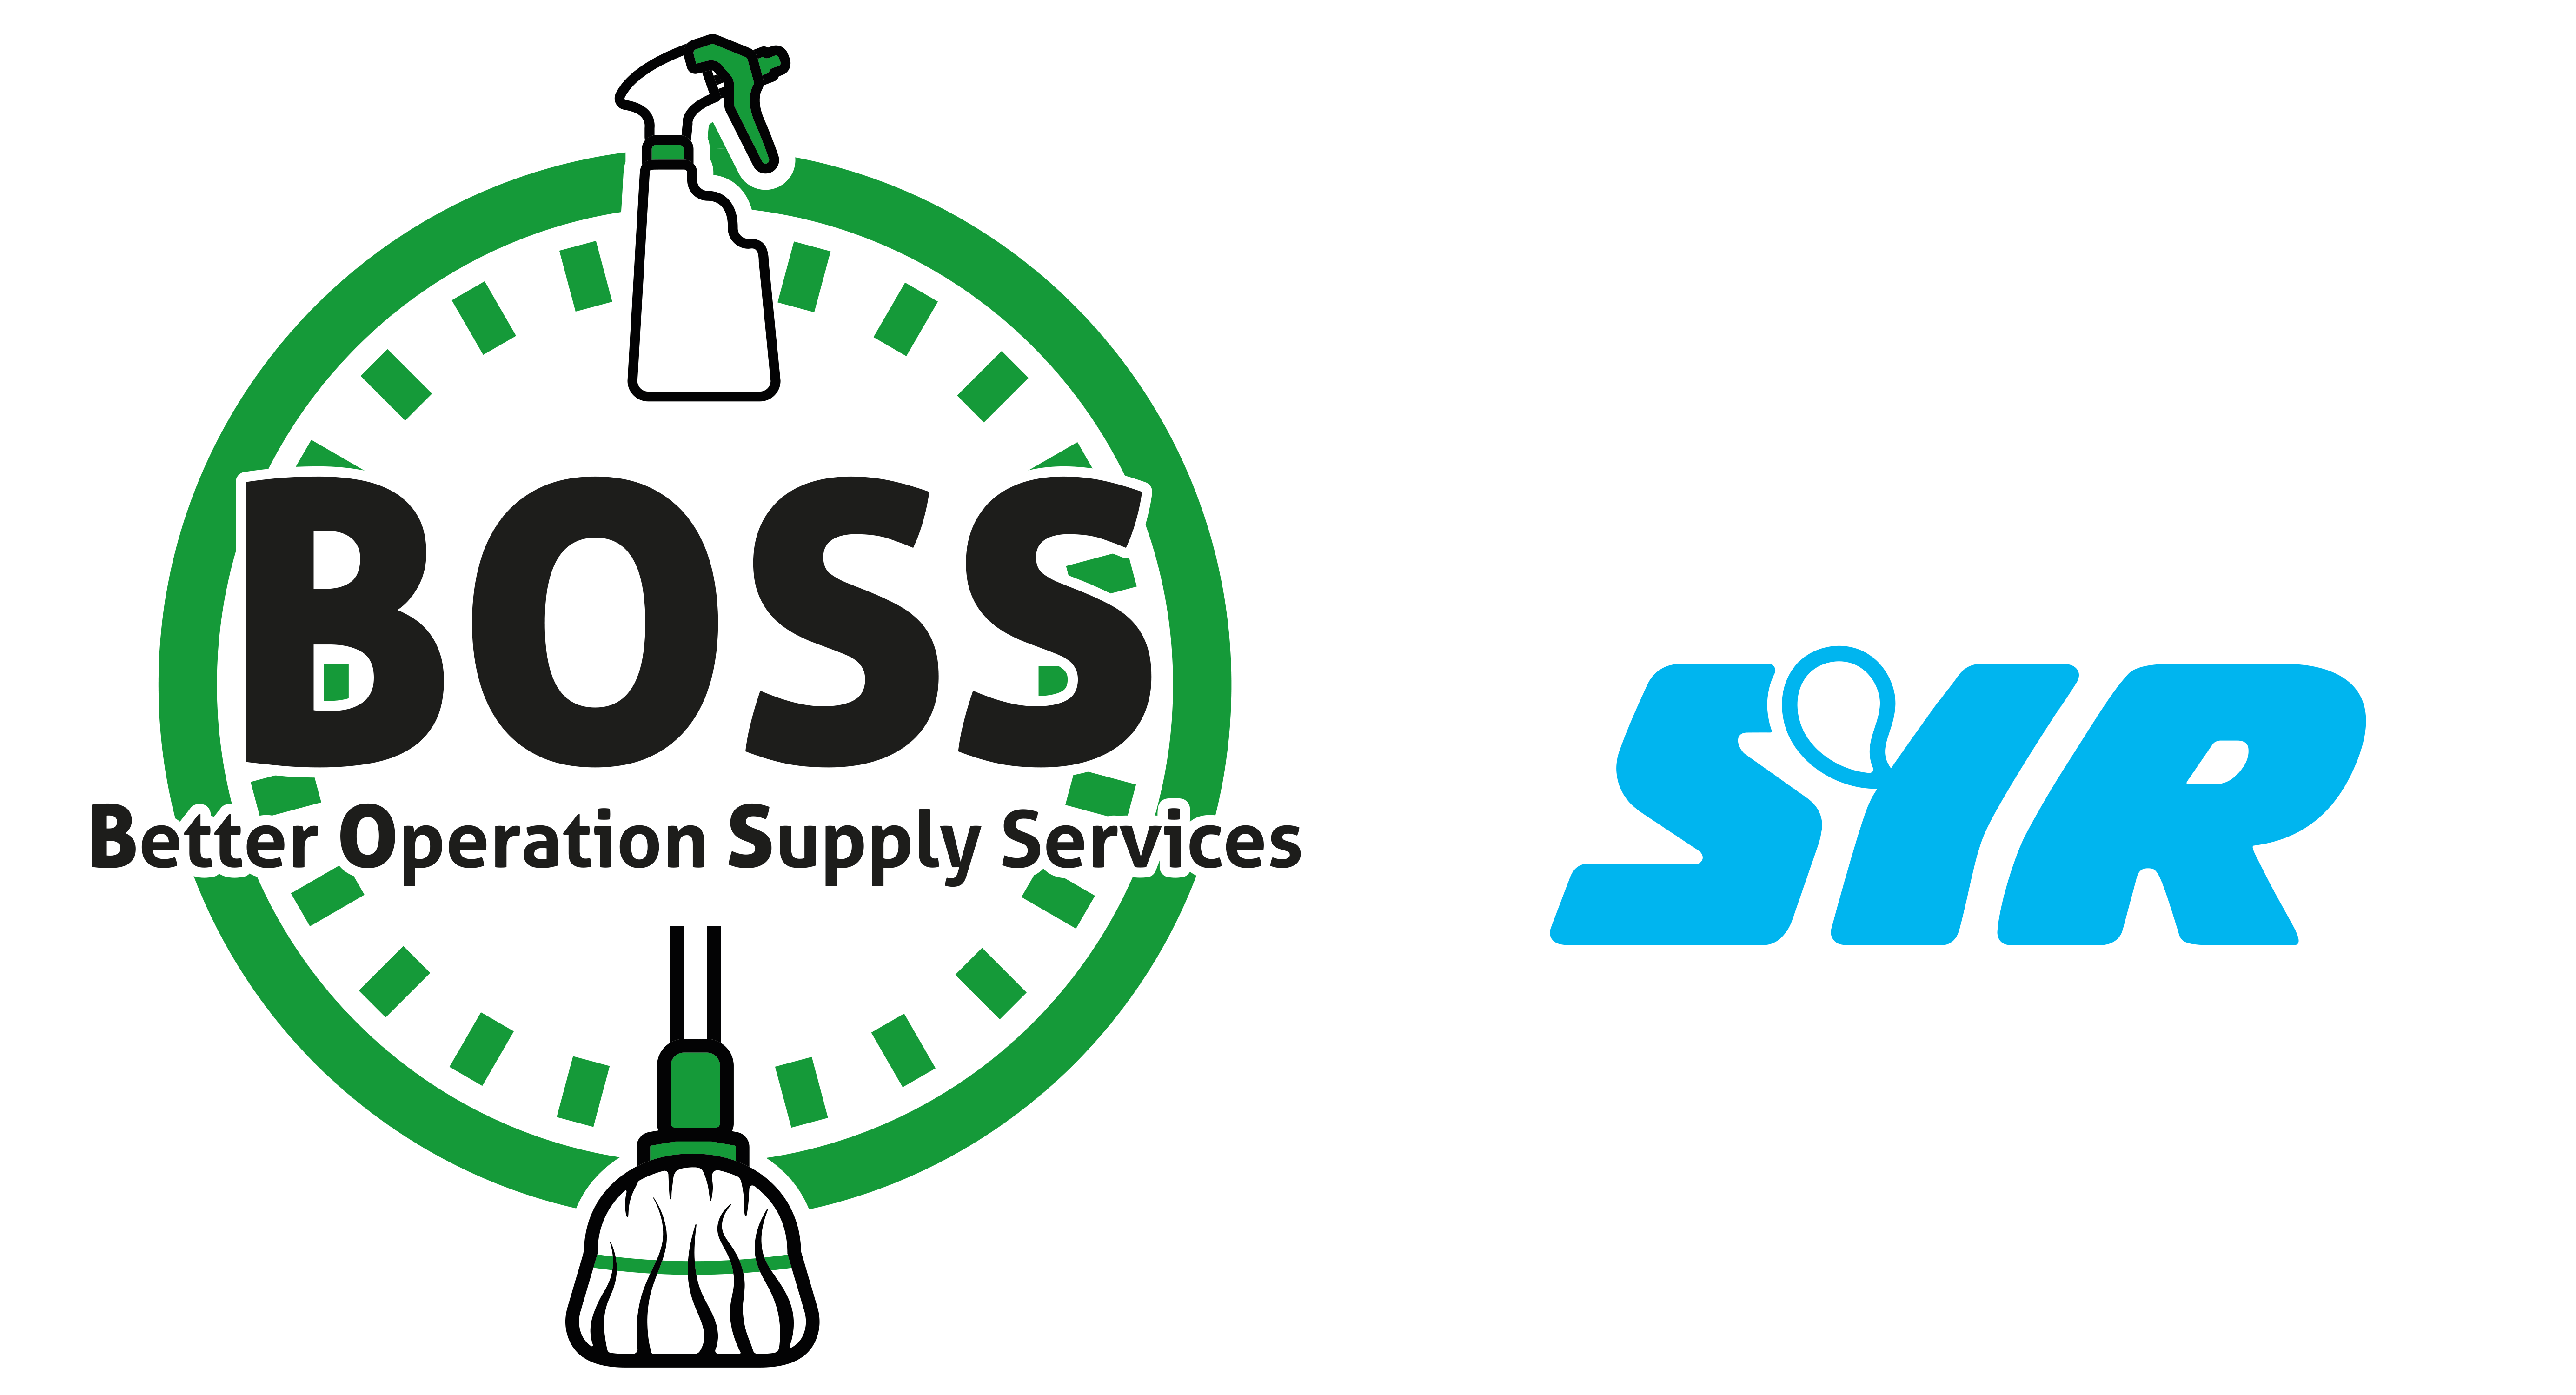 BOSS Better Operation Supply Services